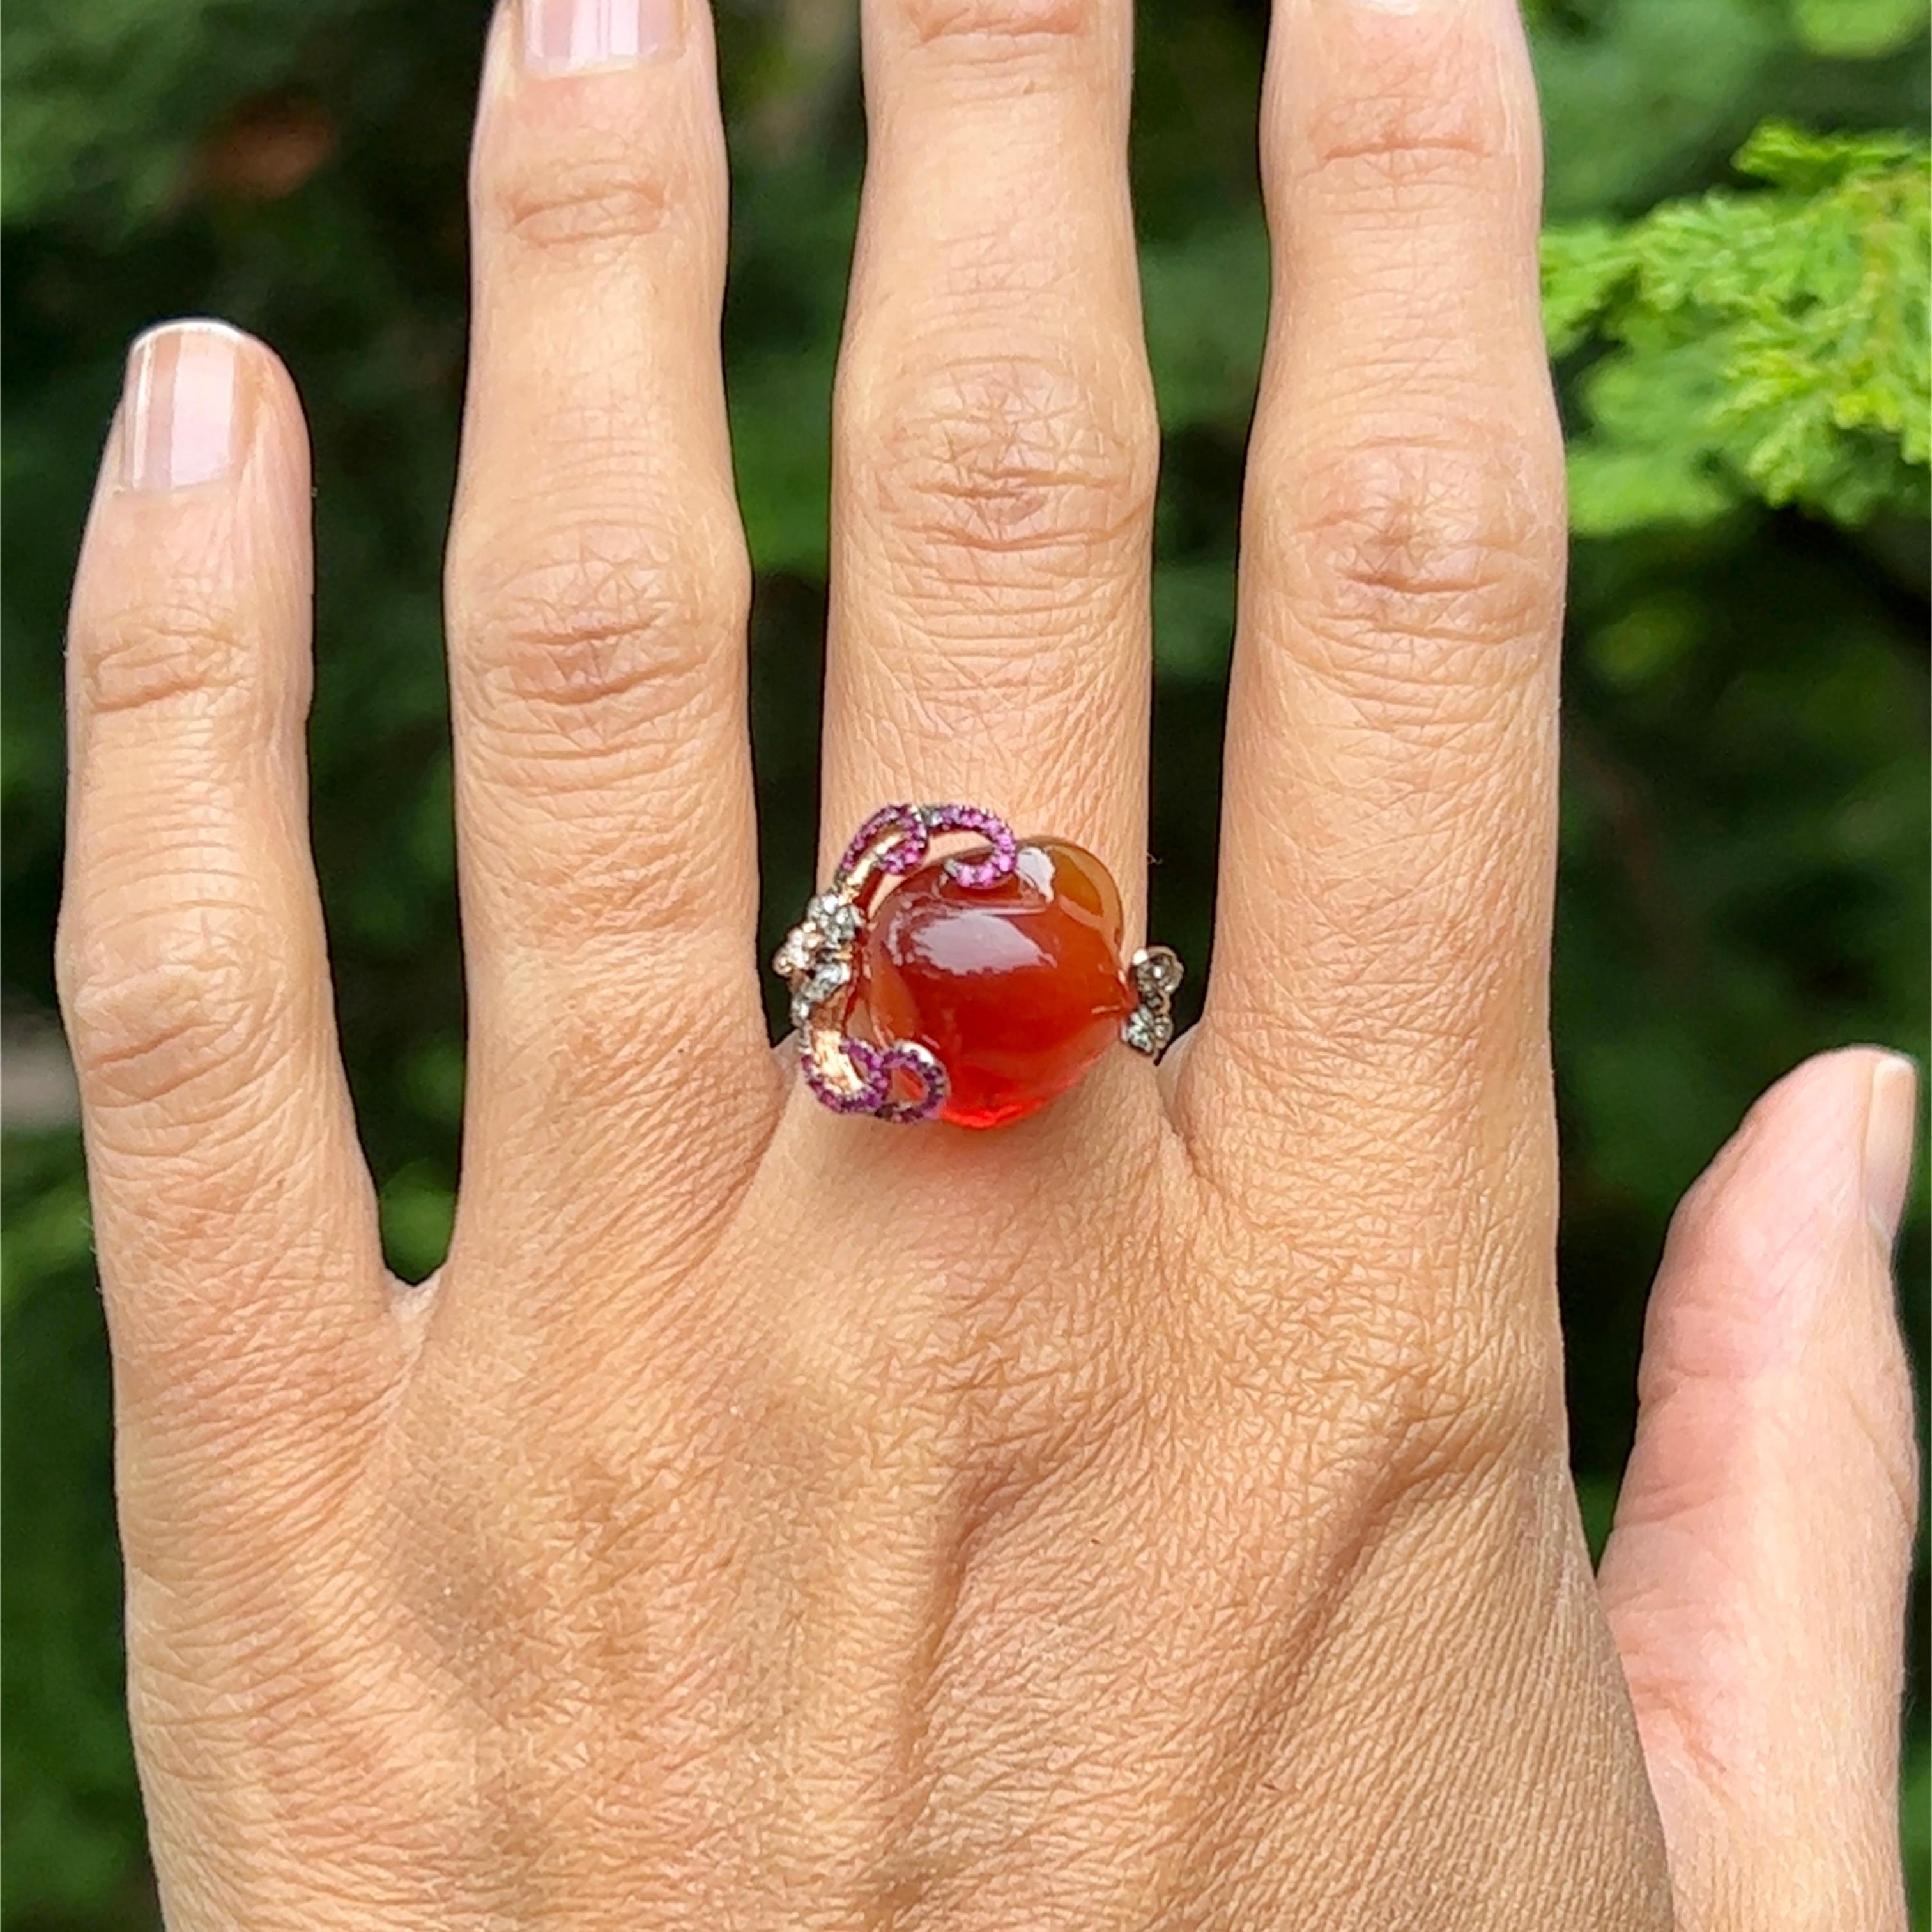 12.24 Carat Mexican Fire Opal with Diamonds and Rubies in 14K Rose Gold 1